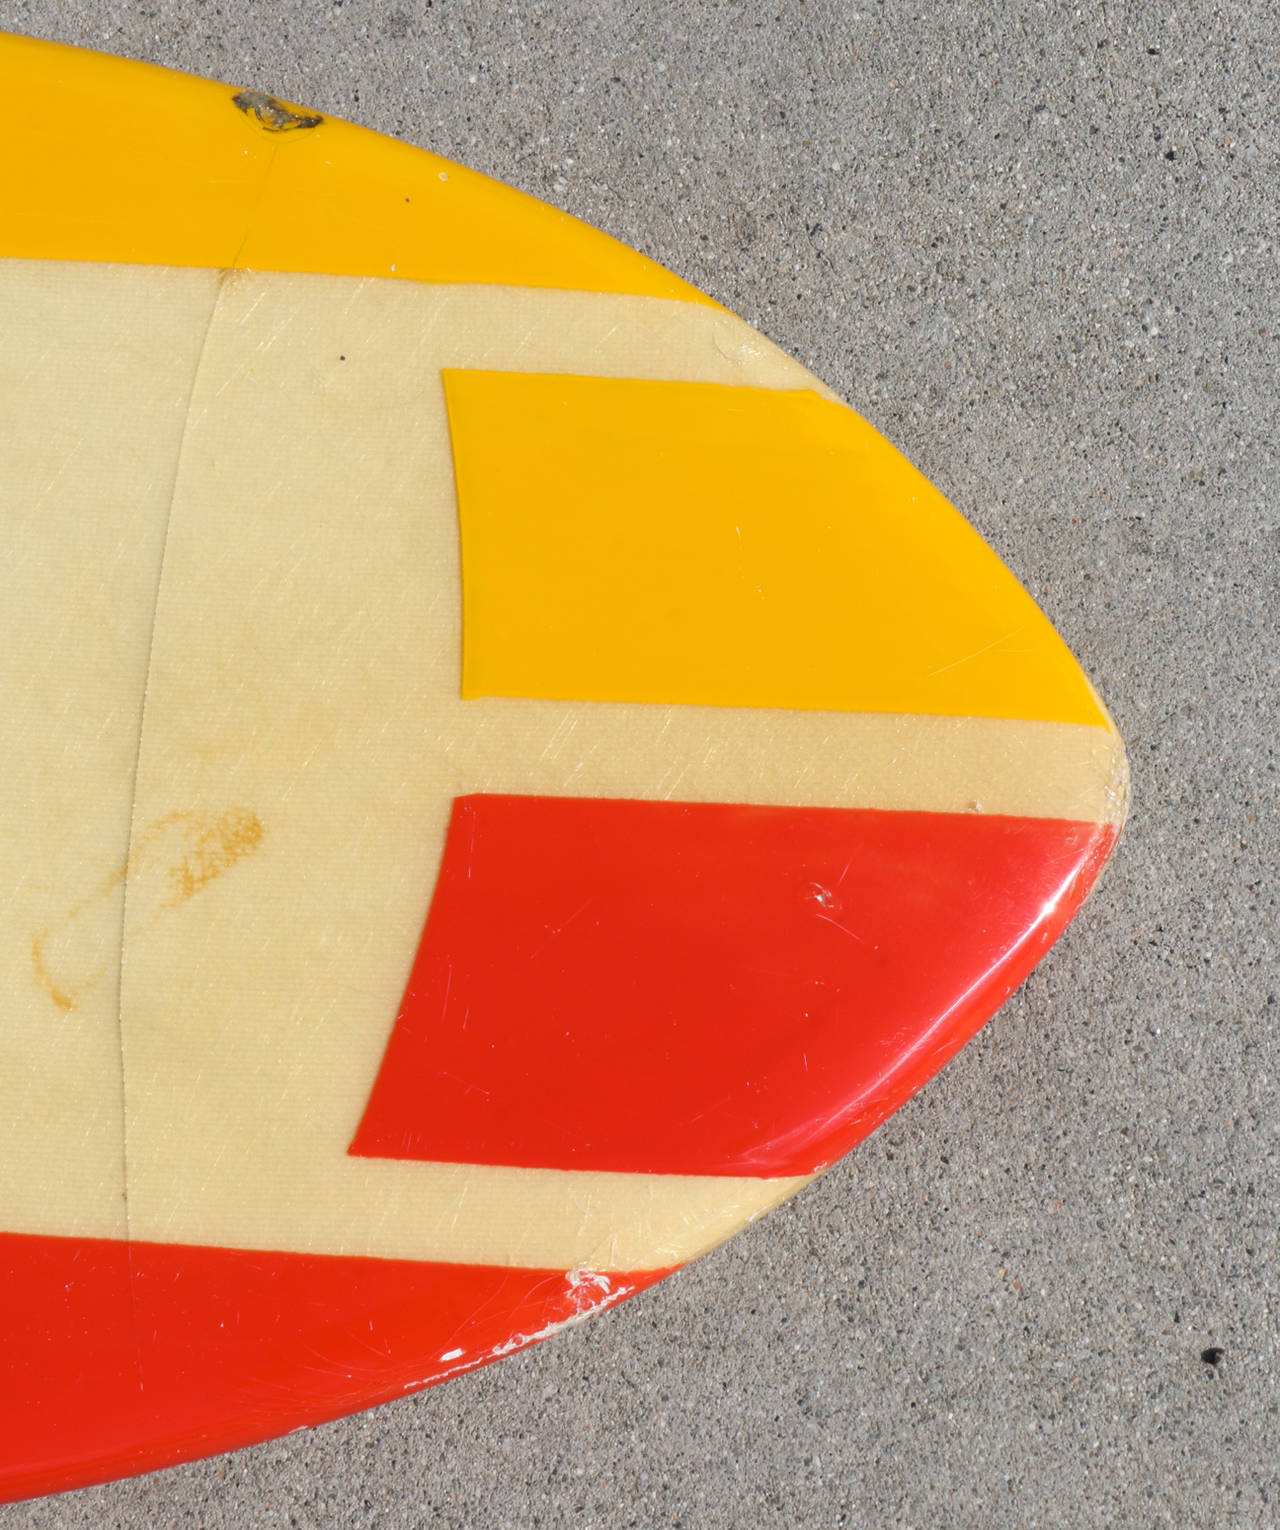 Mid-Century Modern Clear Yellow Red Vintage Dextra Belly Board, California Surfboard Circa 1960s For Sale